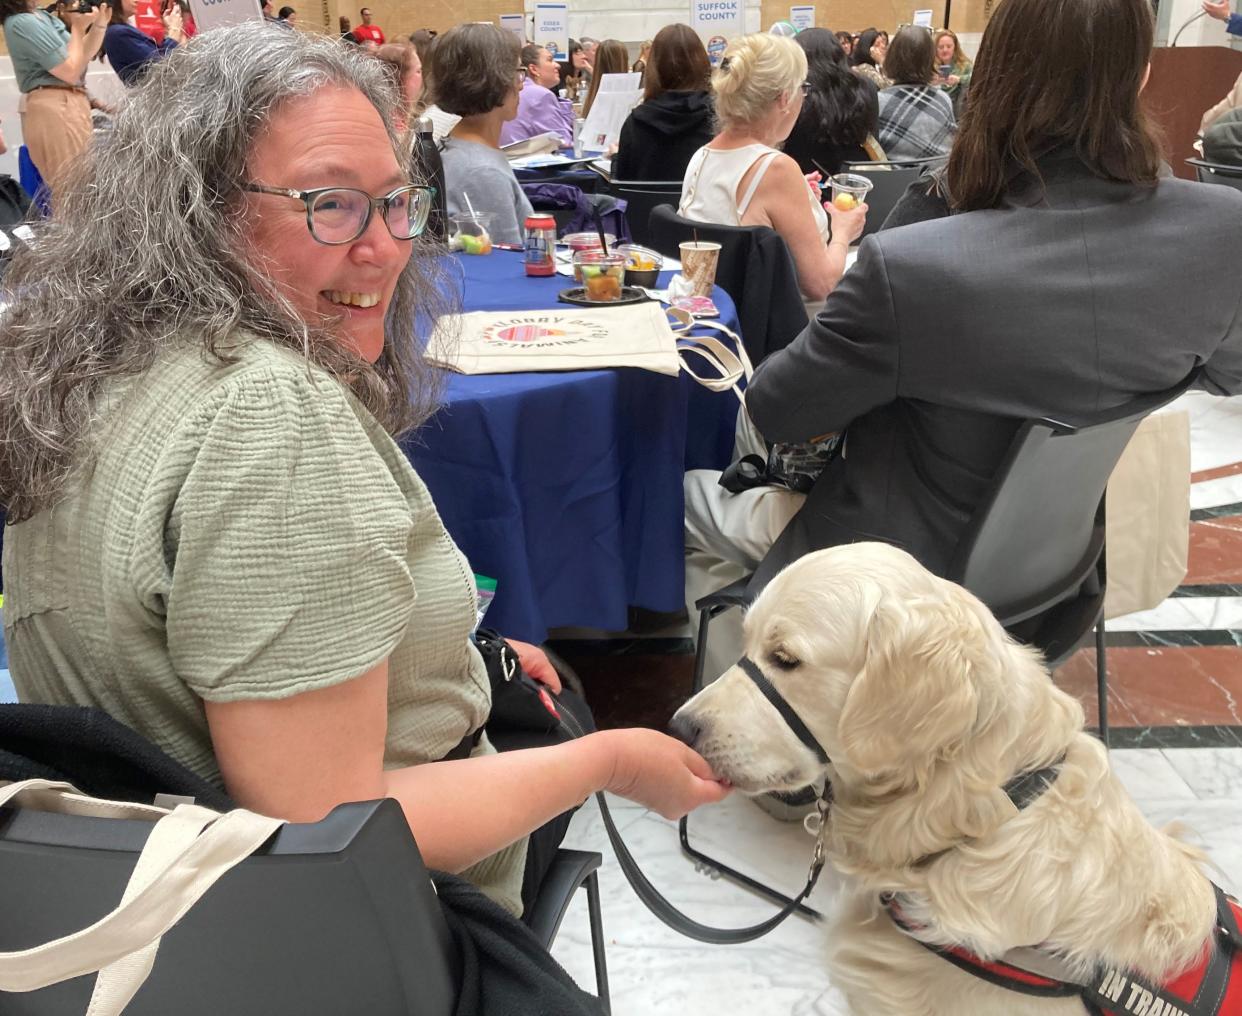 Odin, of Needham, is offered a treat by Betty Waterman, who is training the golden retriever to be a service dog for a person with disabilities. The two, along with husband Ernie Waterman, attended Animal Advocacy Day Tuesday at the State House.